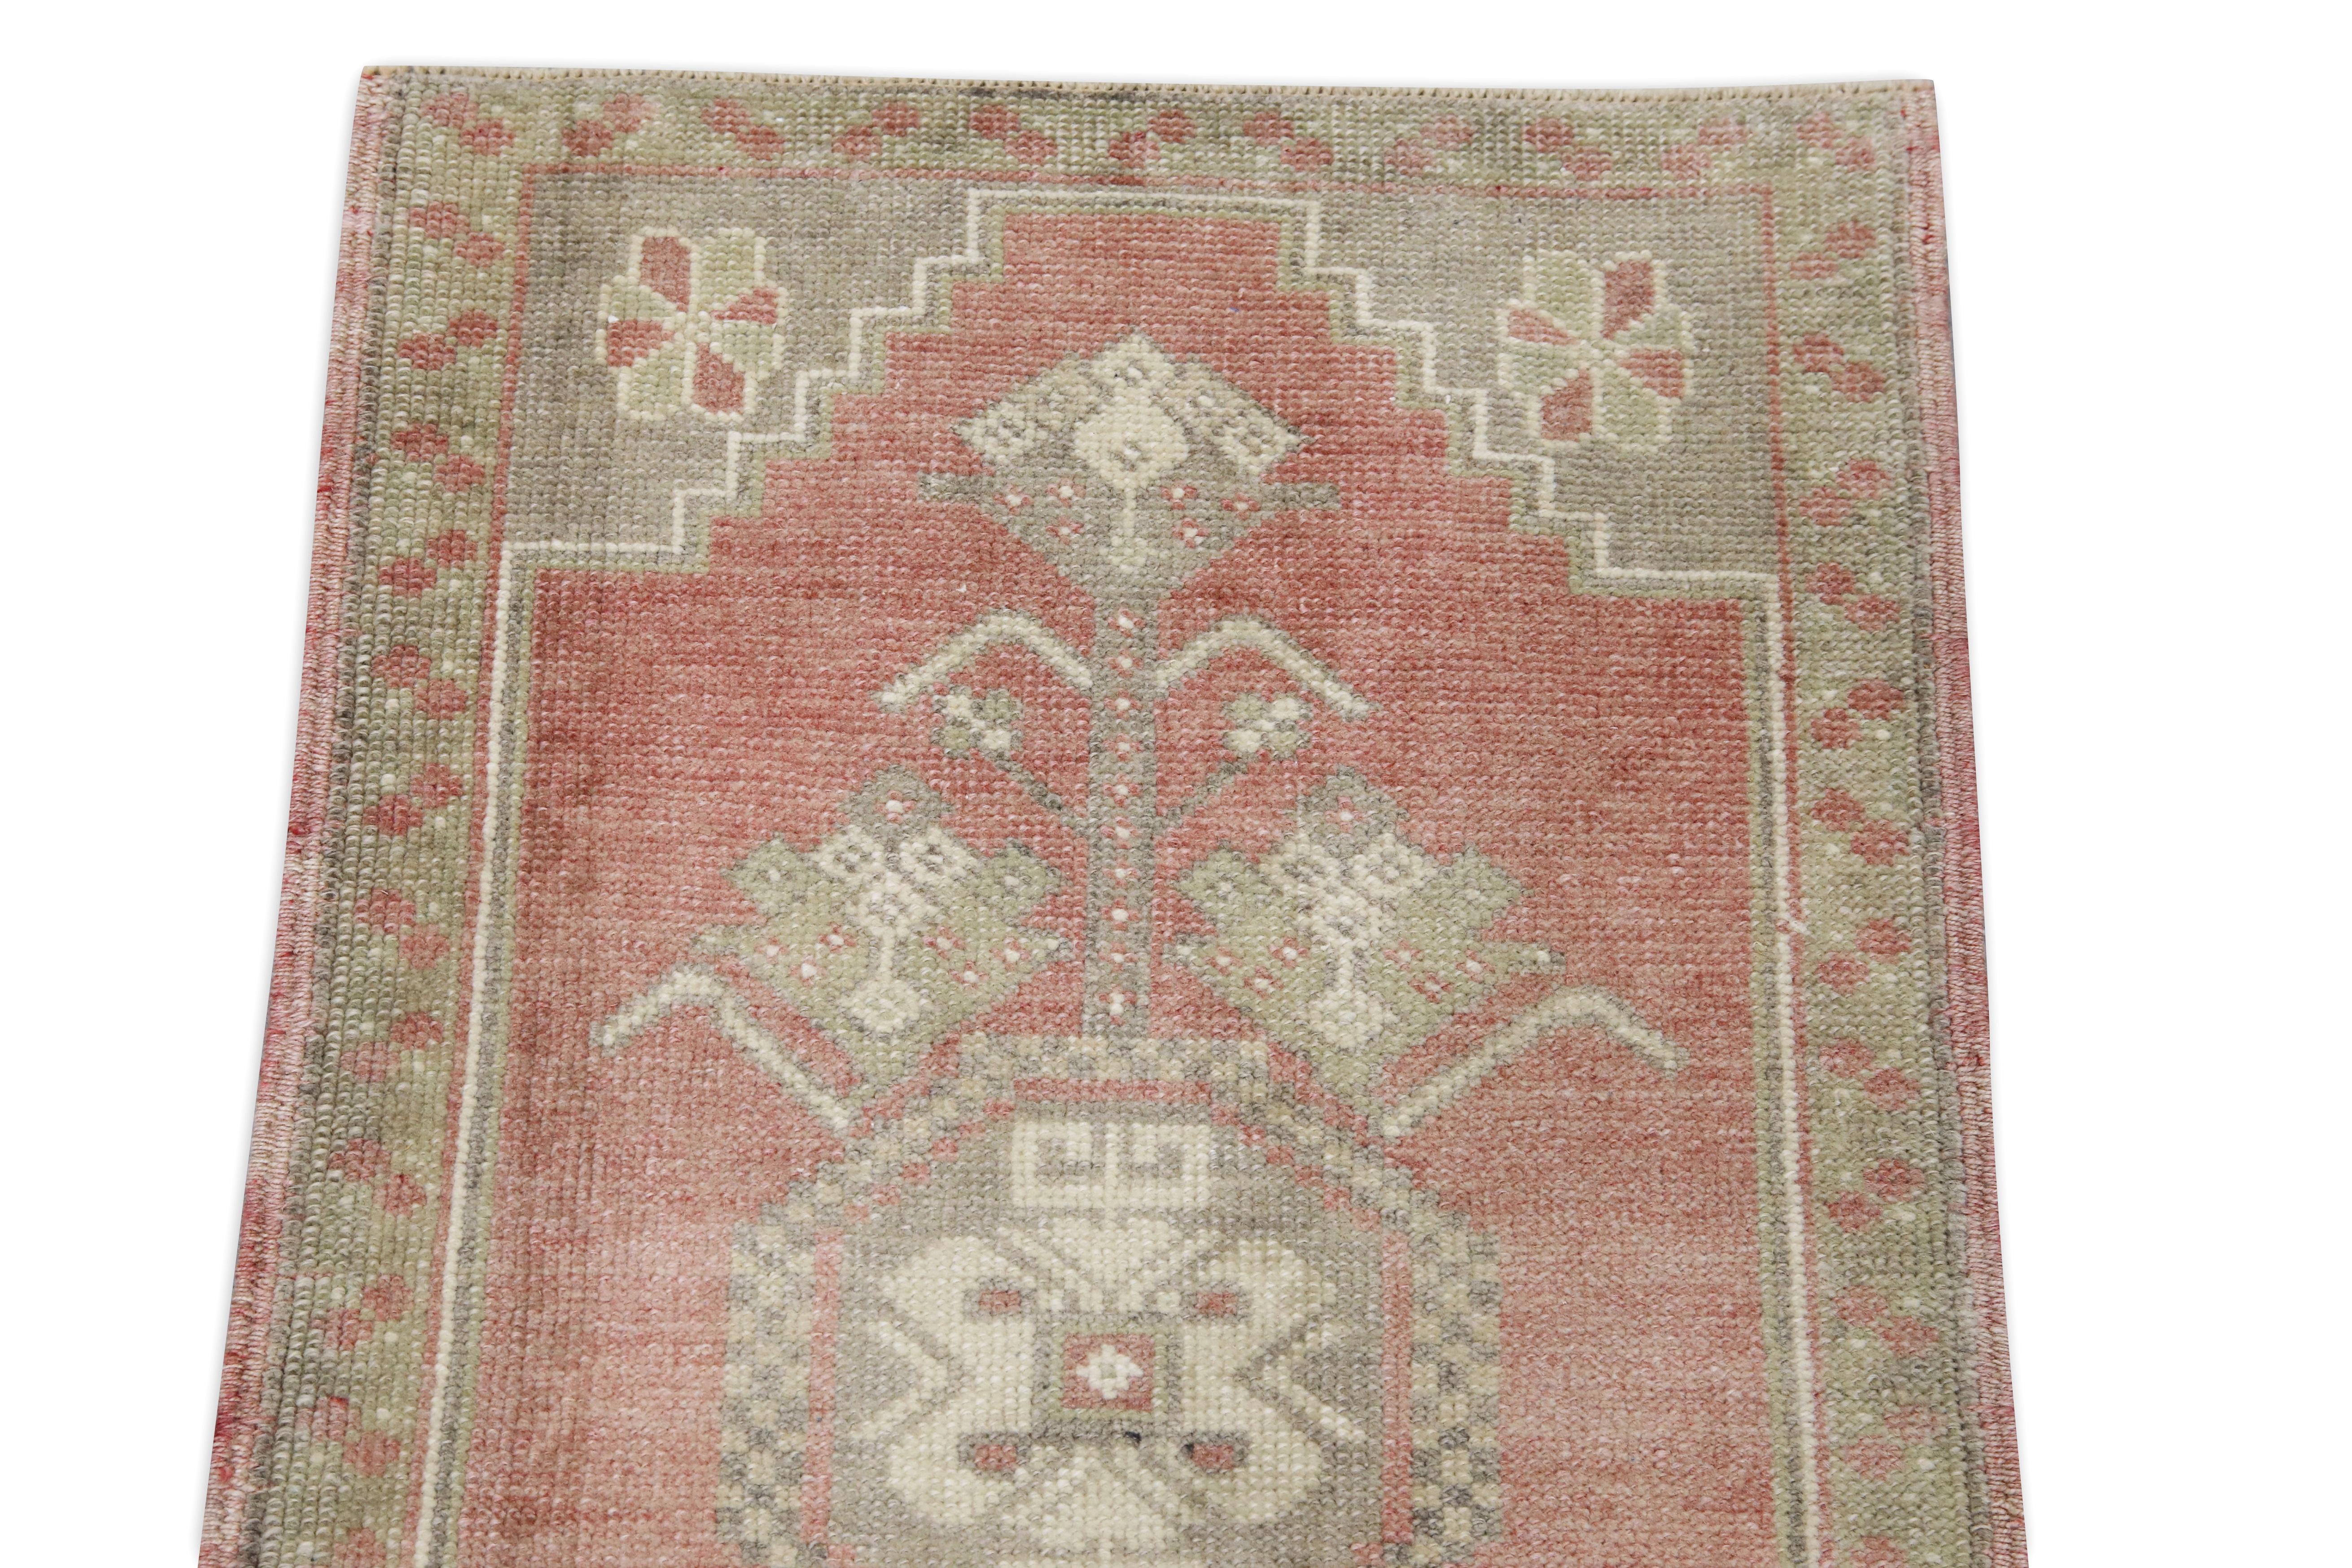 Hand-Woven 1960s Red & Taupe Vintage Turkish Mini Rug 1'7